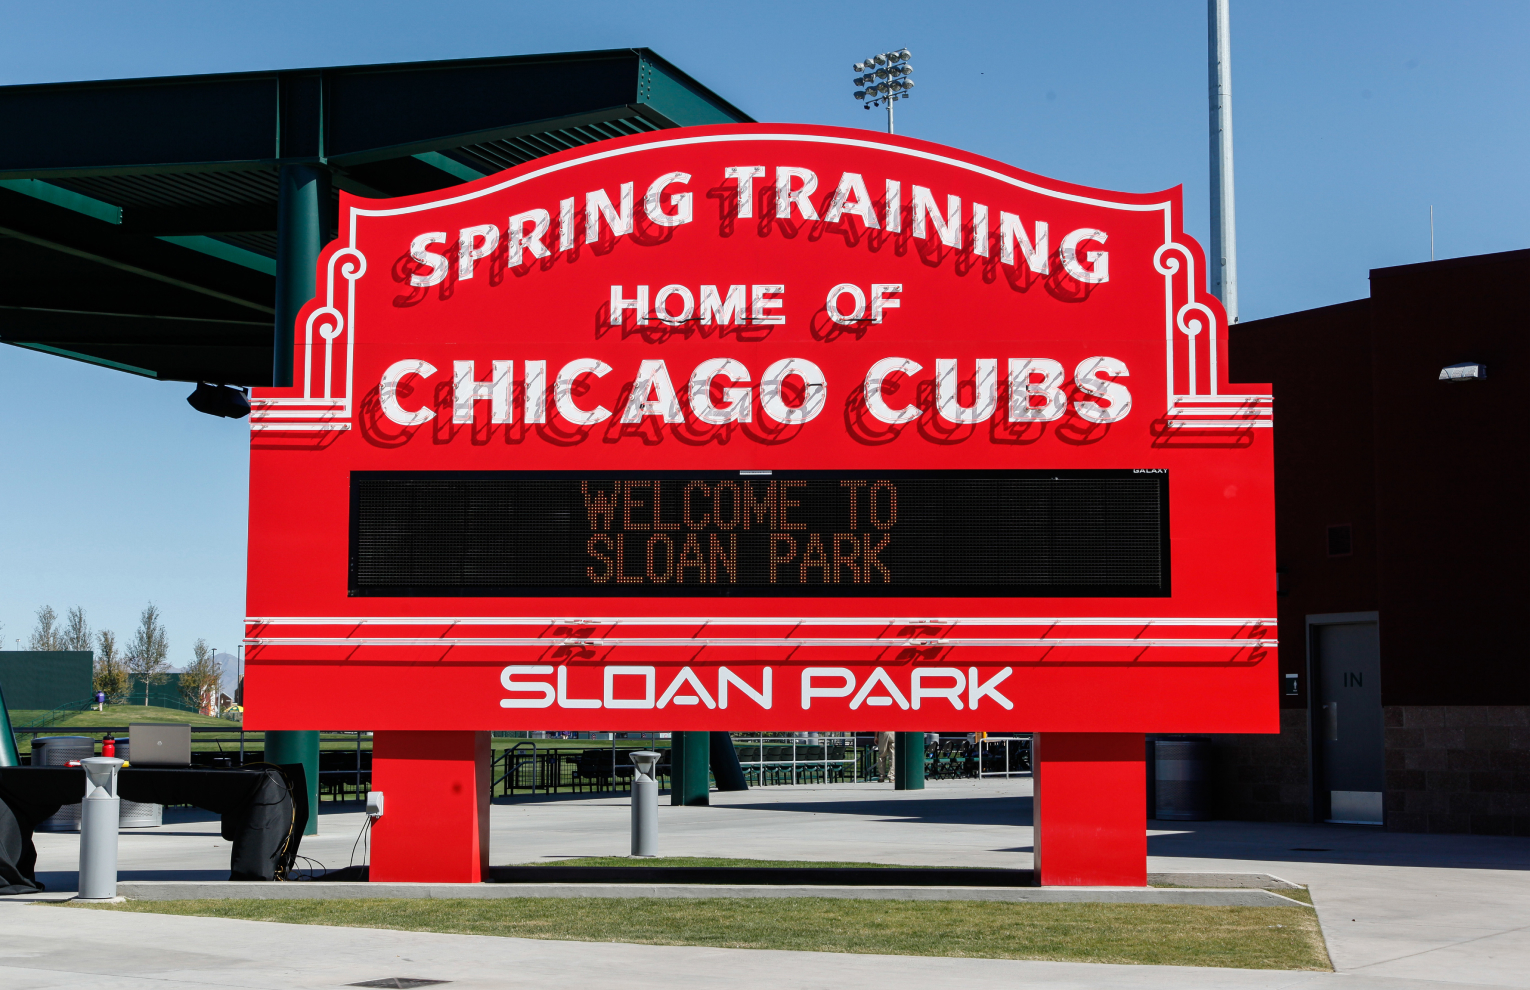 Spring Training Home Of The Chicago Cubs - Sloan Park, Mesa